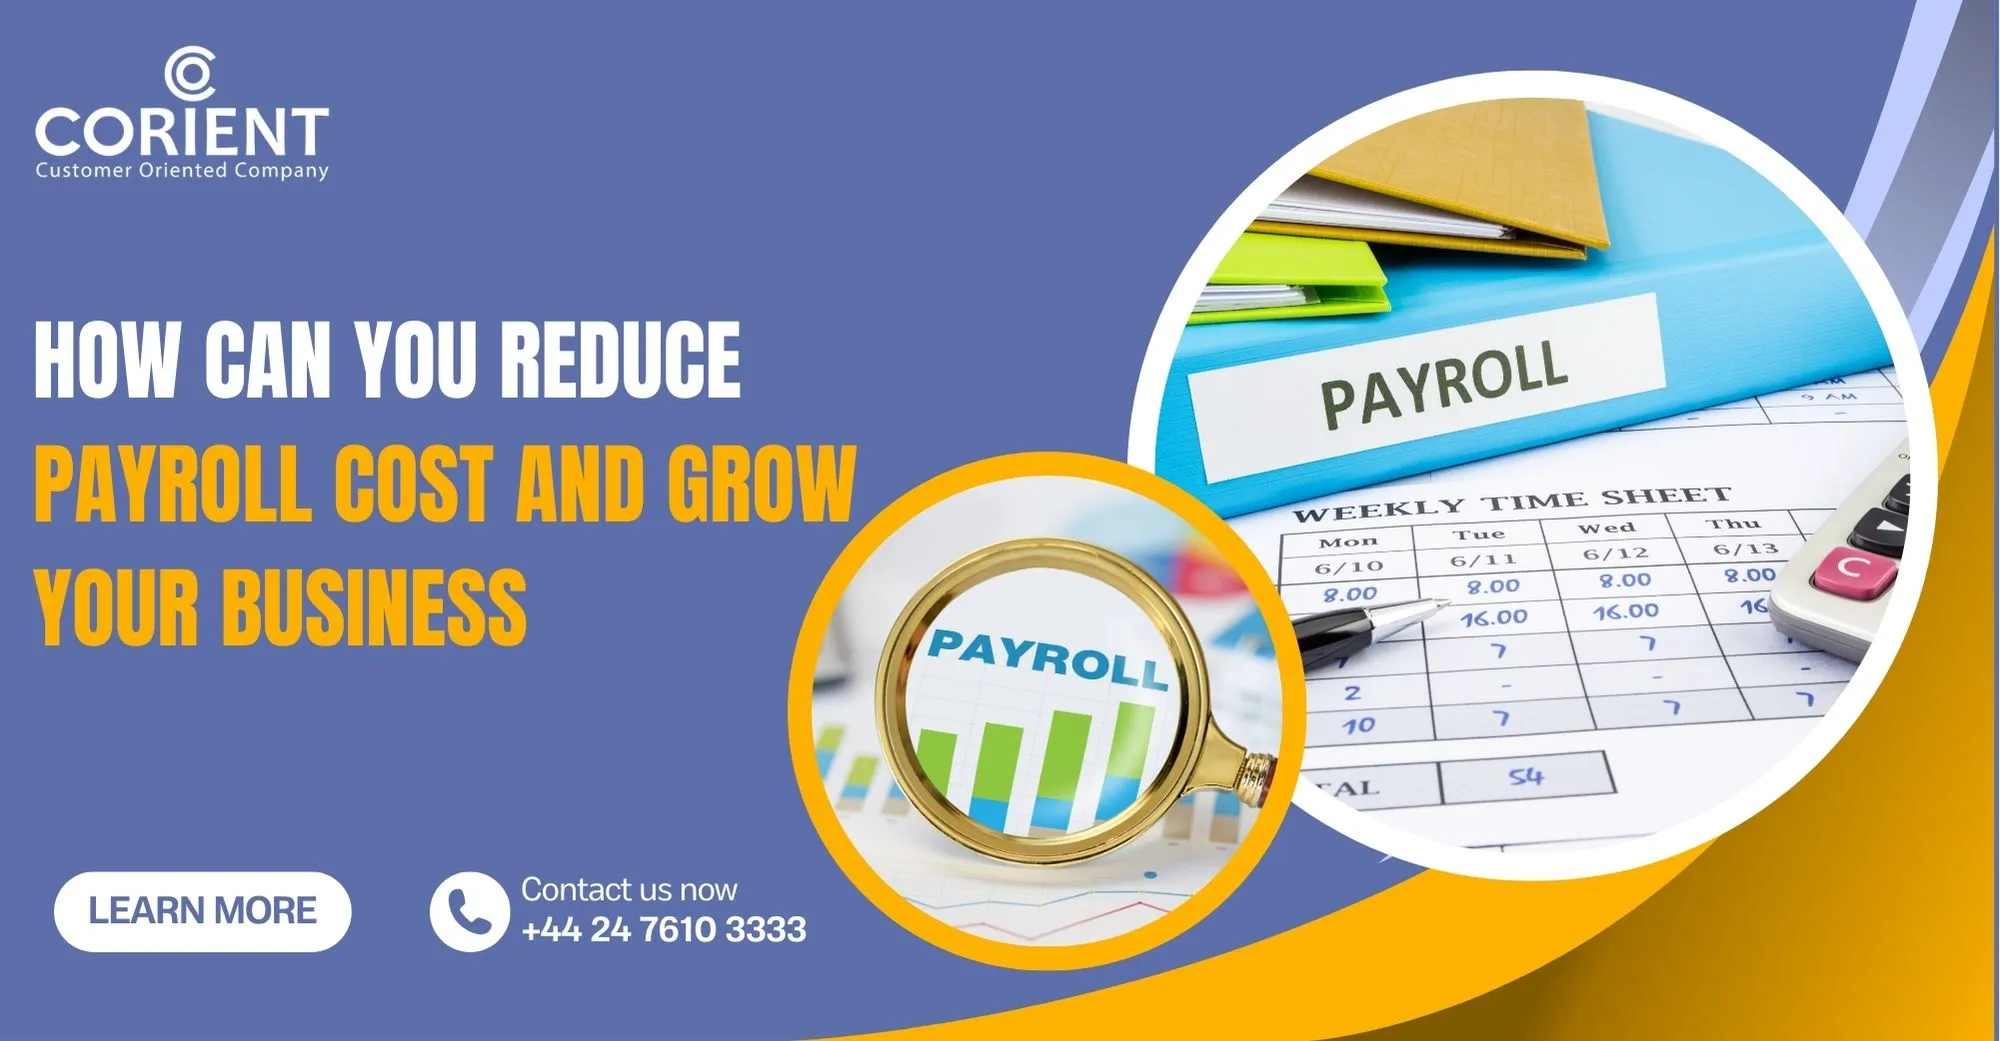 How Can You Reduce Payroll Cost and Grow Your Business?